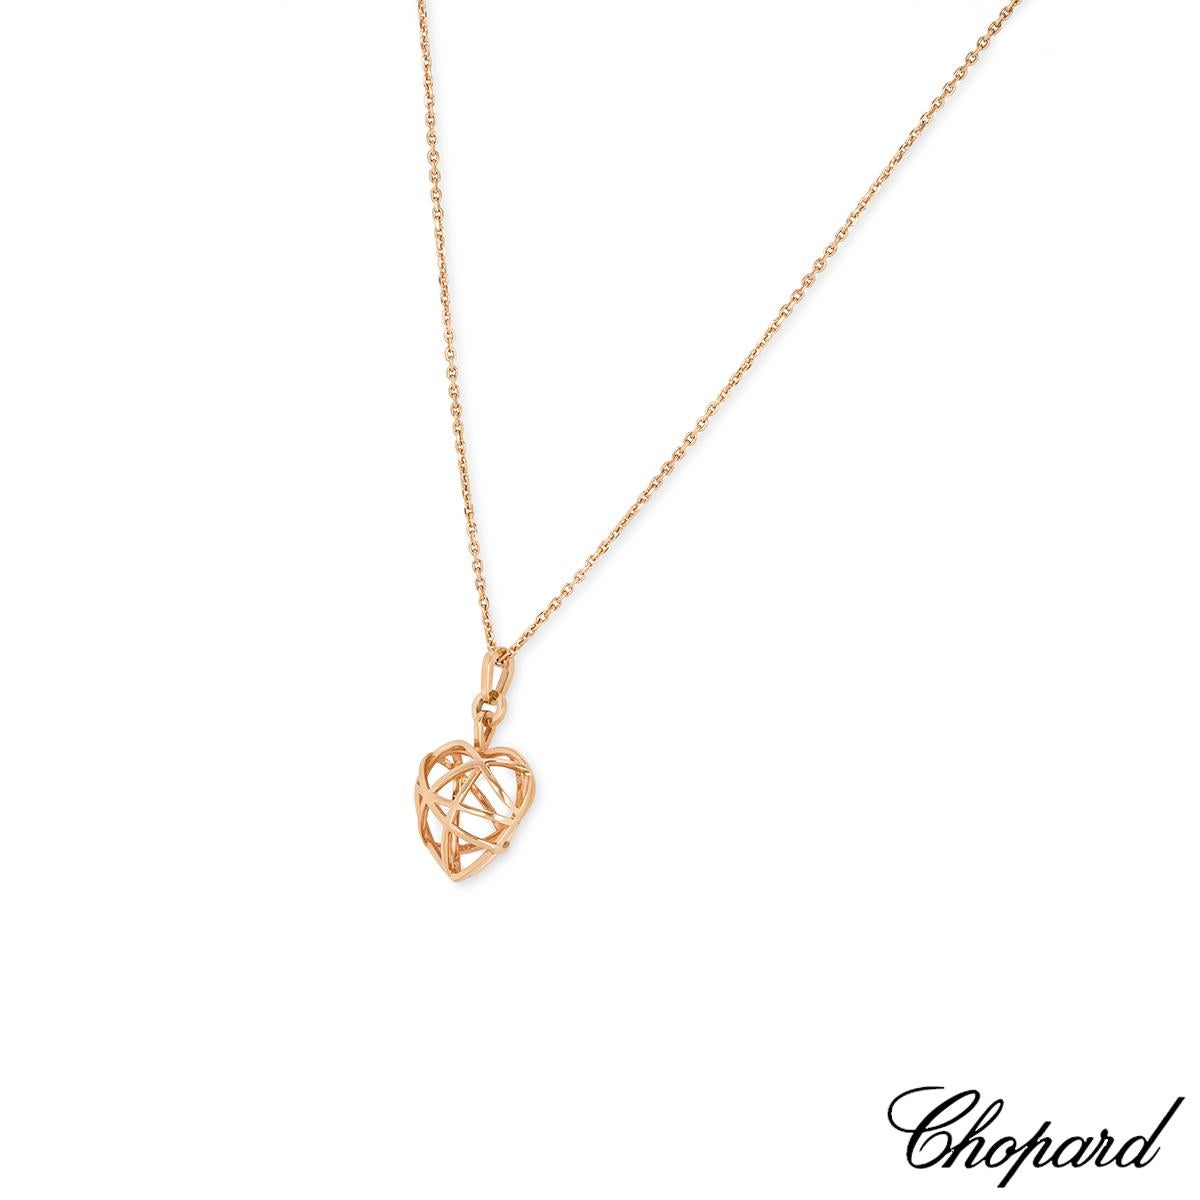 An 18k rose gold heart pendant from the Guli collection by Chopard. The pendant consists of an openwork heart motif measuring 1.6cm in width and 1.8cm in length. The pendant comes on an original 19 inch Chopard necklace, complete with lobster clasp